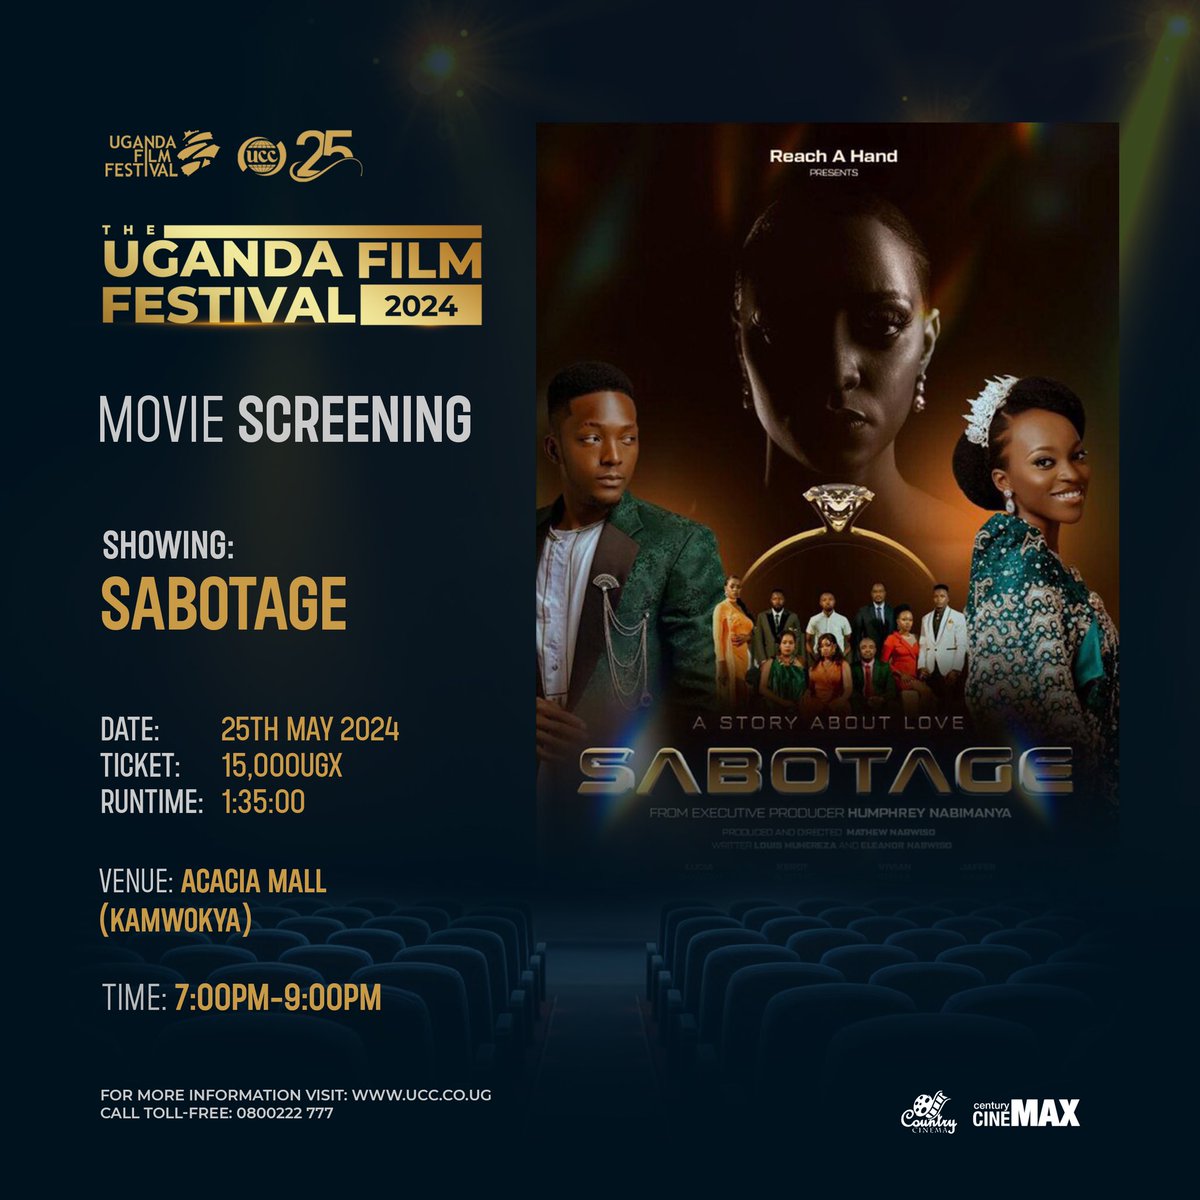 SABOTAGE, a film from the legendary Nabwiso, the producer of Sanyu series. Watch the trailer 👇 and be sure to catch the full movie 🍿 this 25th May 2024 at Acacia Mall for only 15,000 (UGX) #UFF2024 #localstoriesGlobalImpact